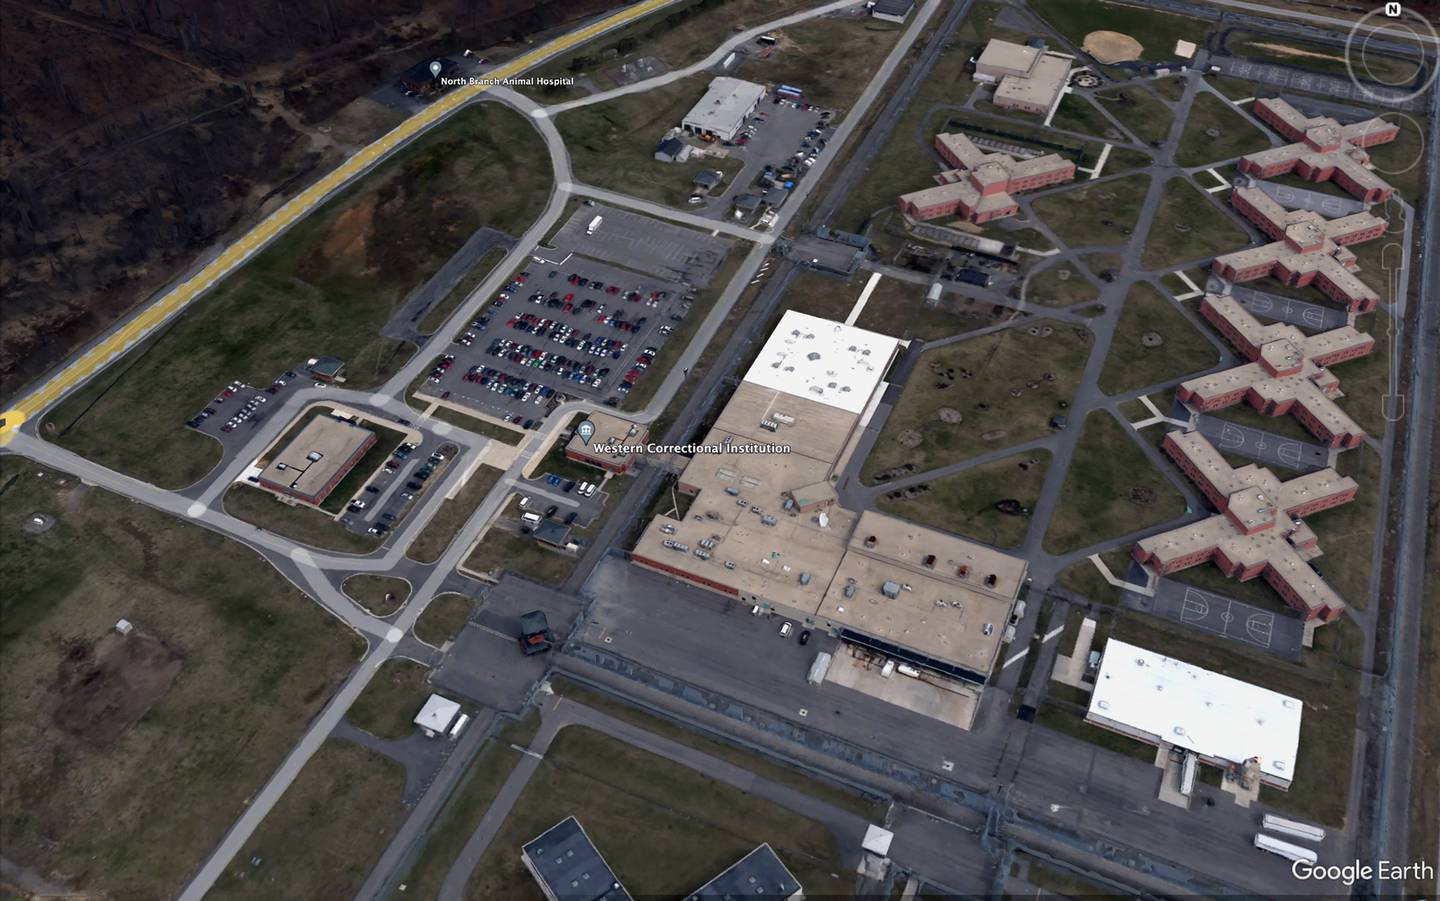 Satellite imagery of the Western Correction Institution in Cumberland. Lester DeShazor alleged that correctional officers at the prison targeted him for retaliation.